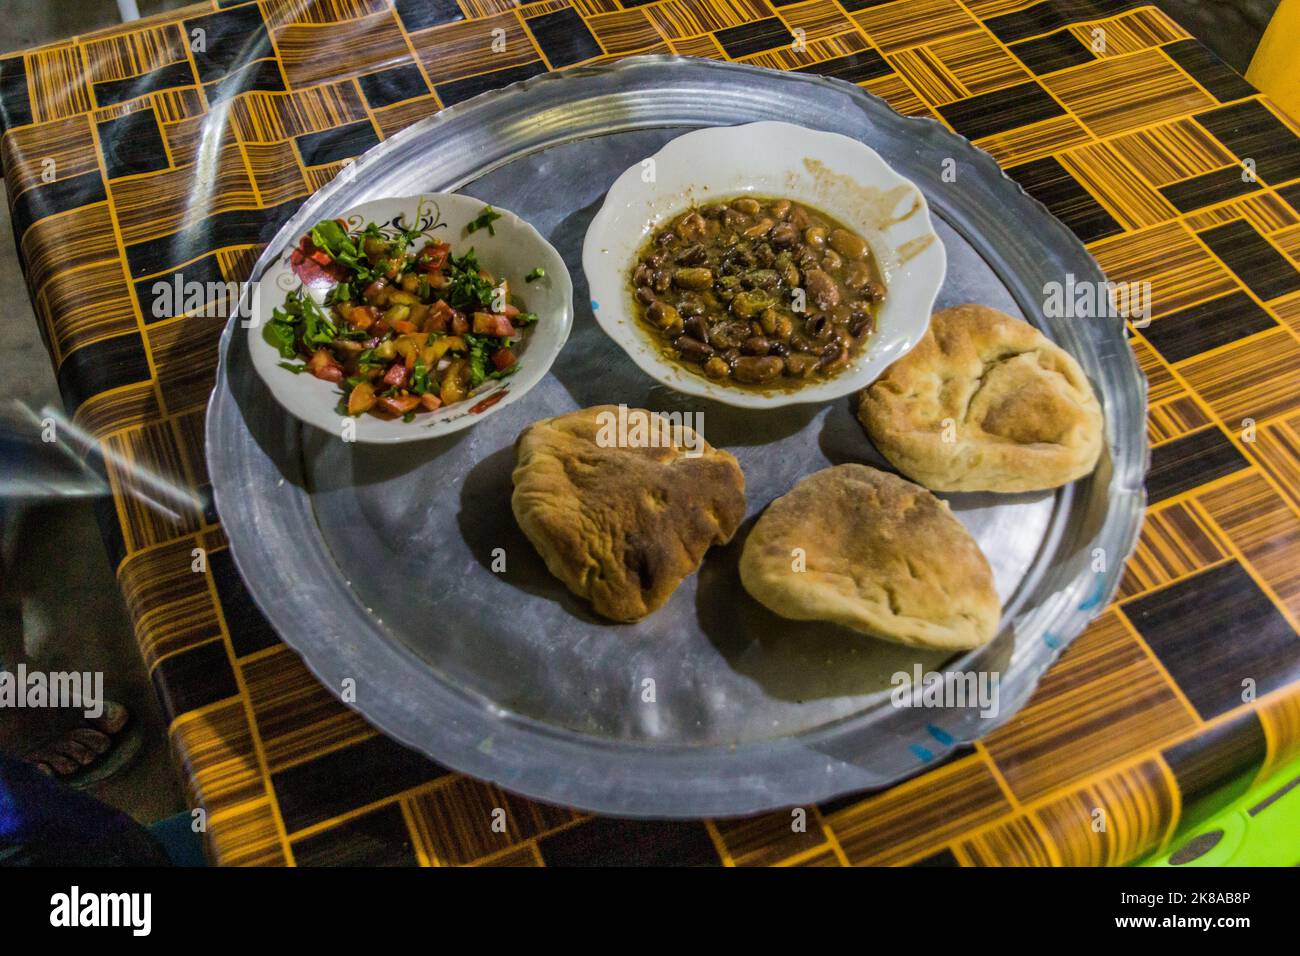 Traditional meal in Sudan - fuul (stew of cooked fava beans), salad and bread. Stock Photo